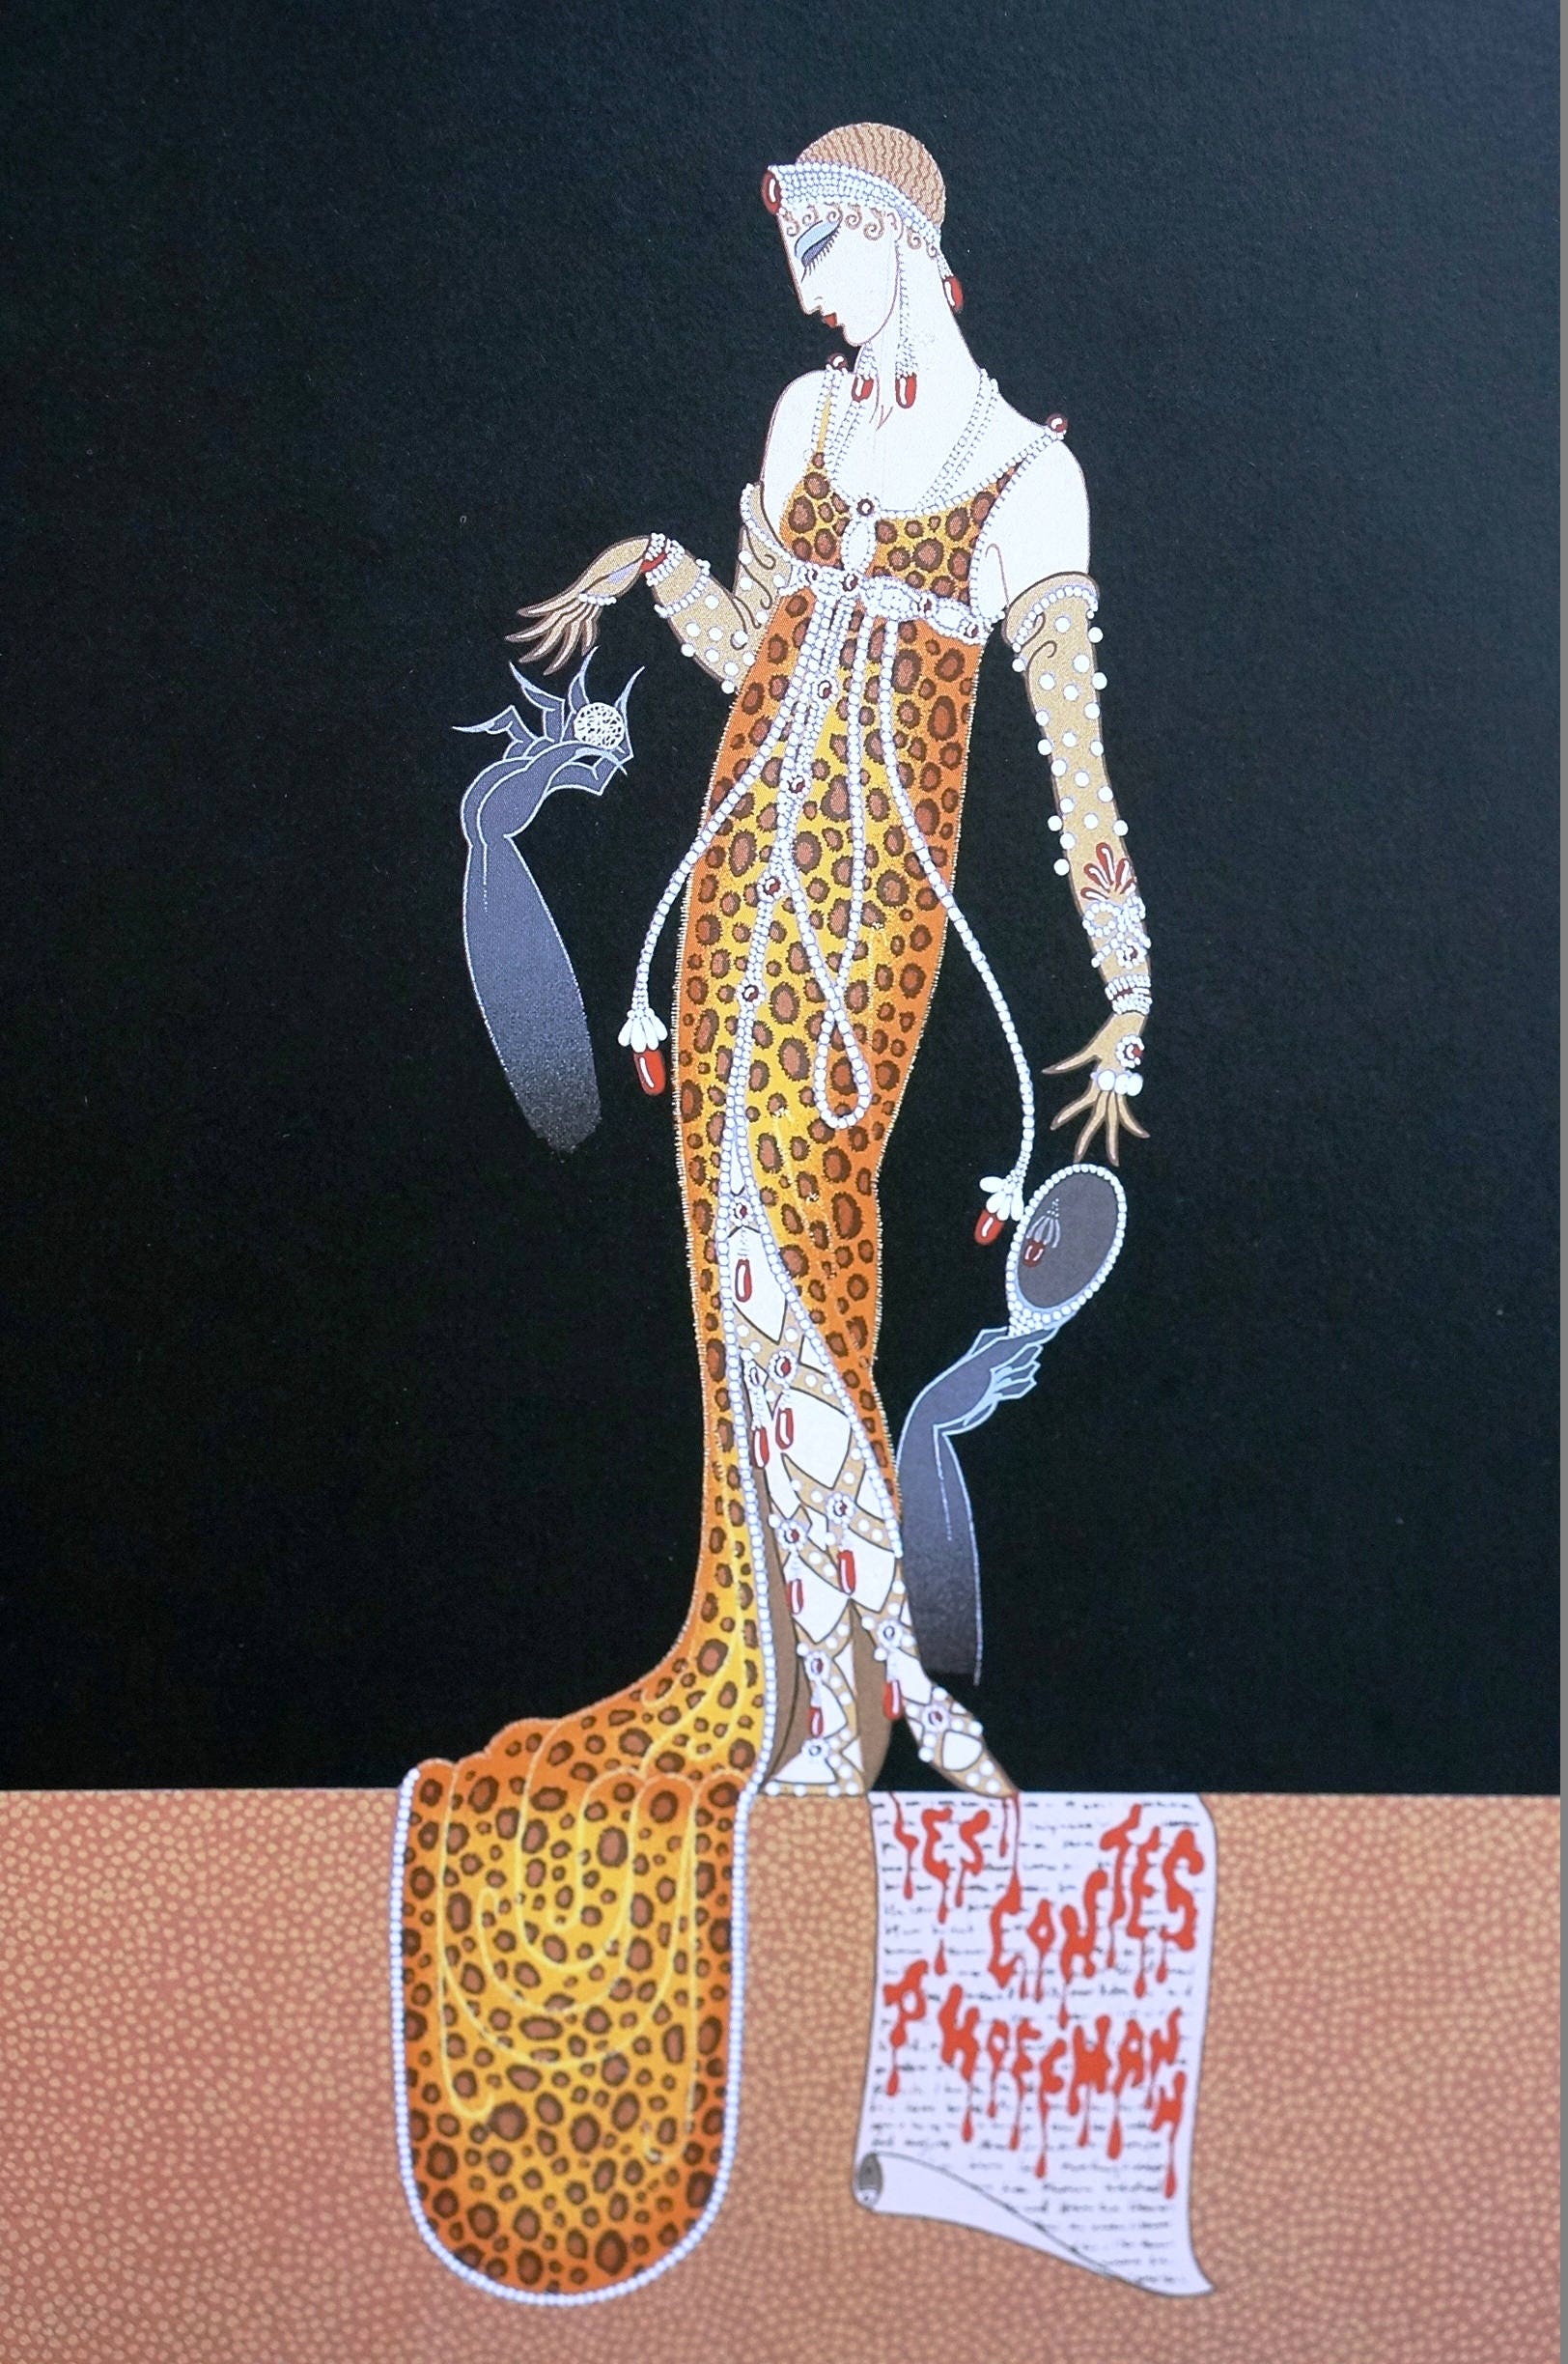 Erte 1987 Lovely Women In Evening /& Night Fancy Gown Dress MATTED Art Deco Fashion Print Professionally Matted Picture Ready to Frame